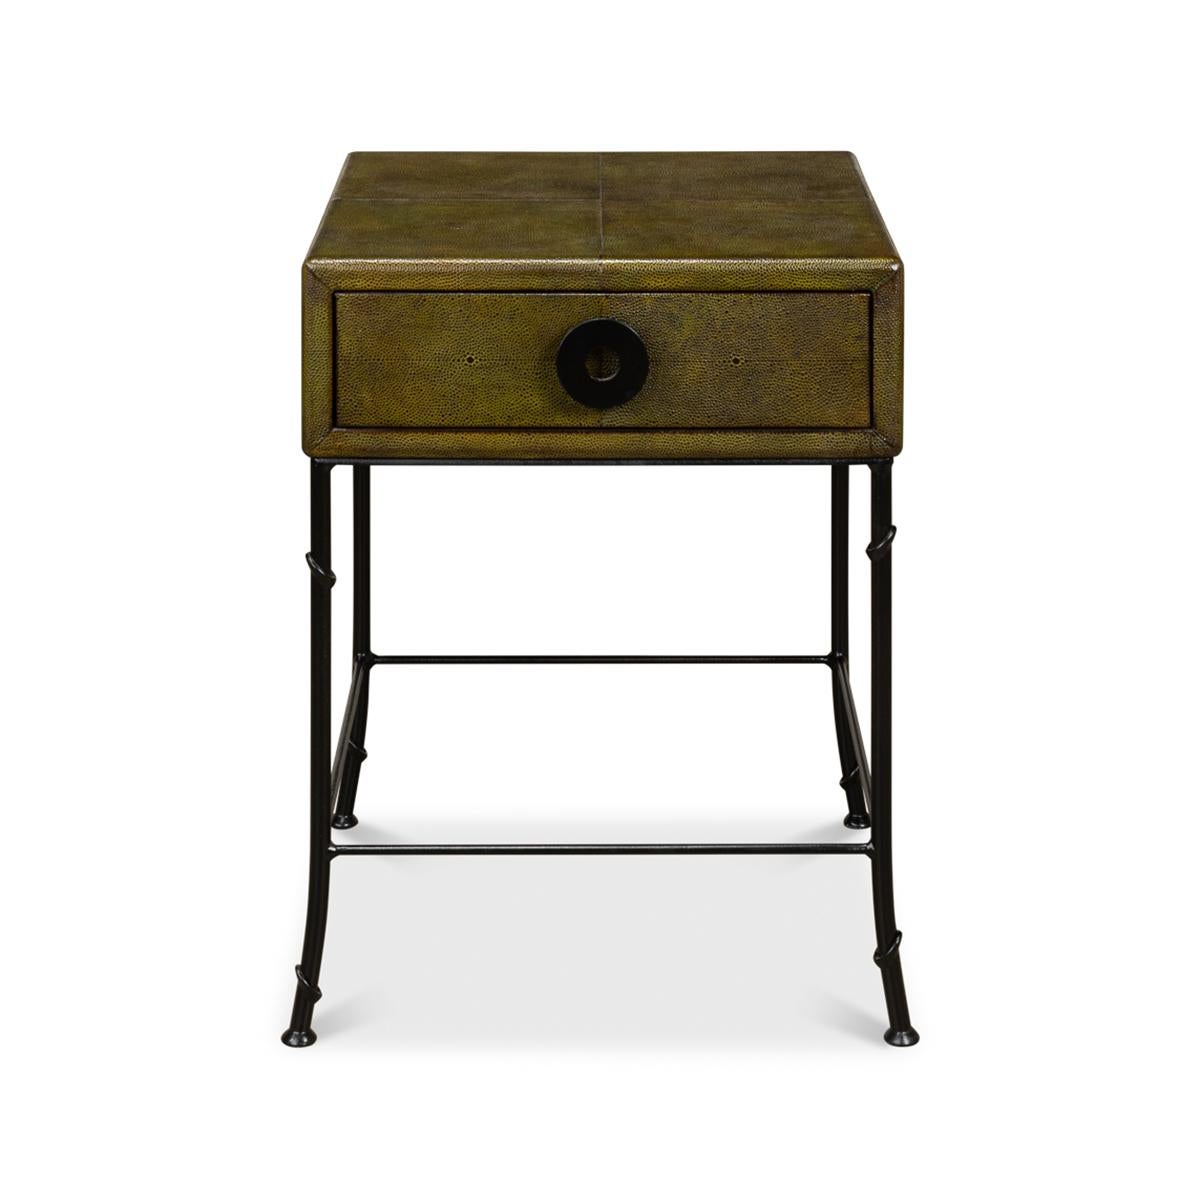 Leather Side Table, with a dark green leather wrapped case, dark iron natural base. 

Dimensions: 18